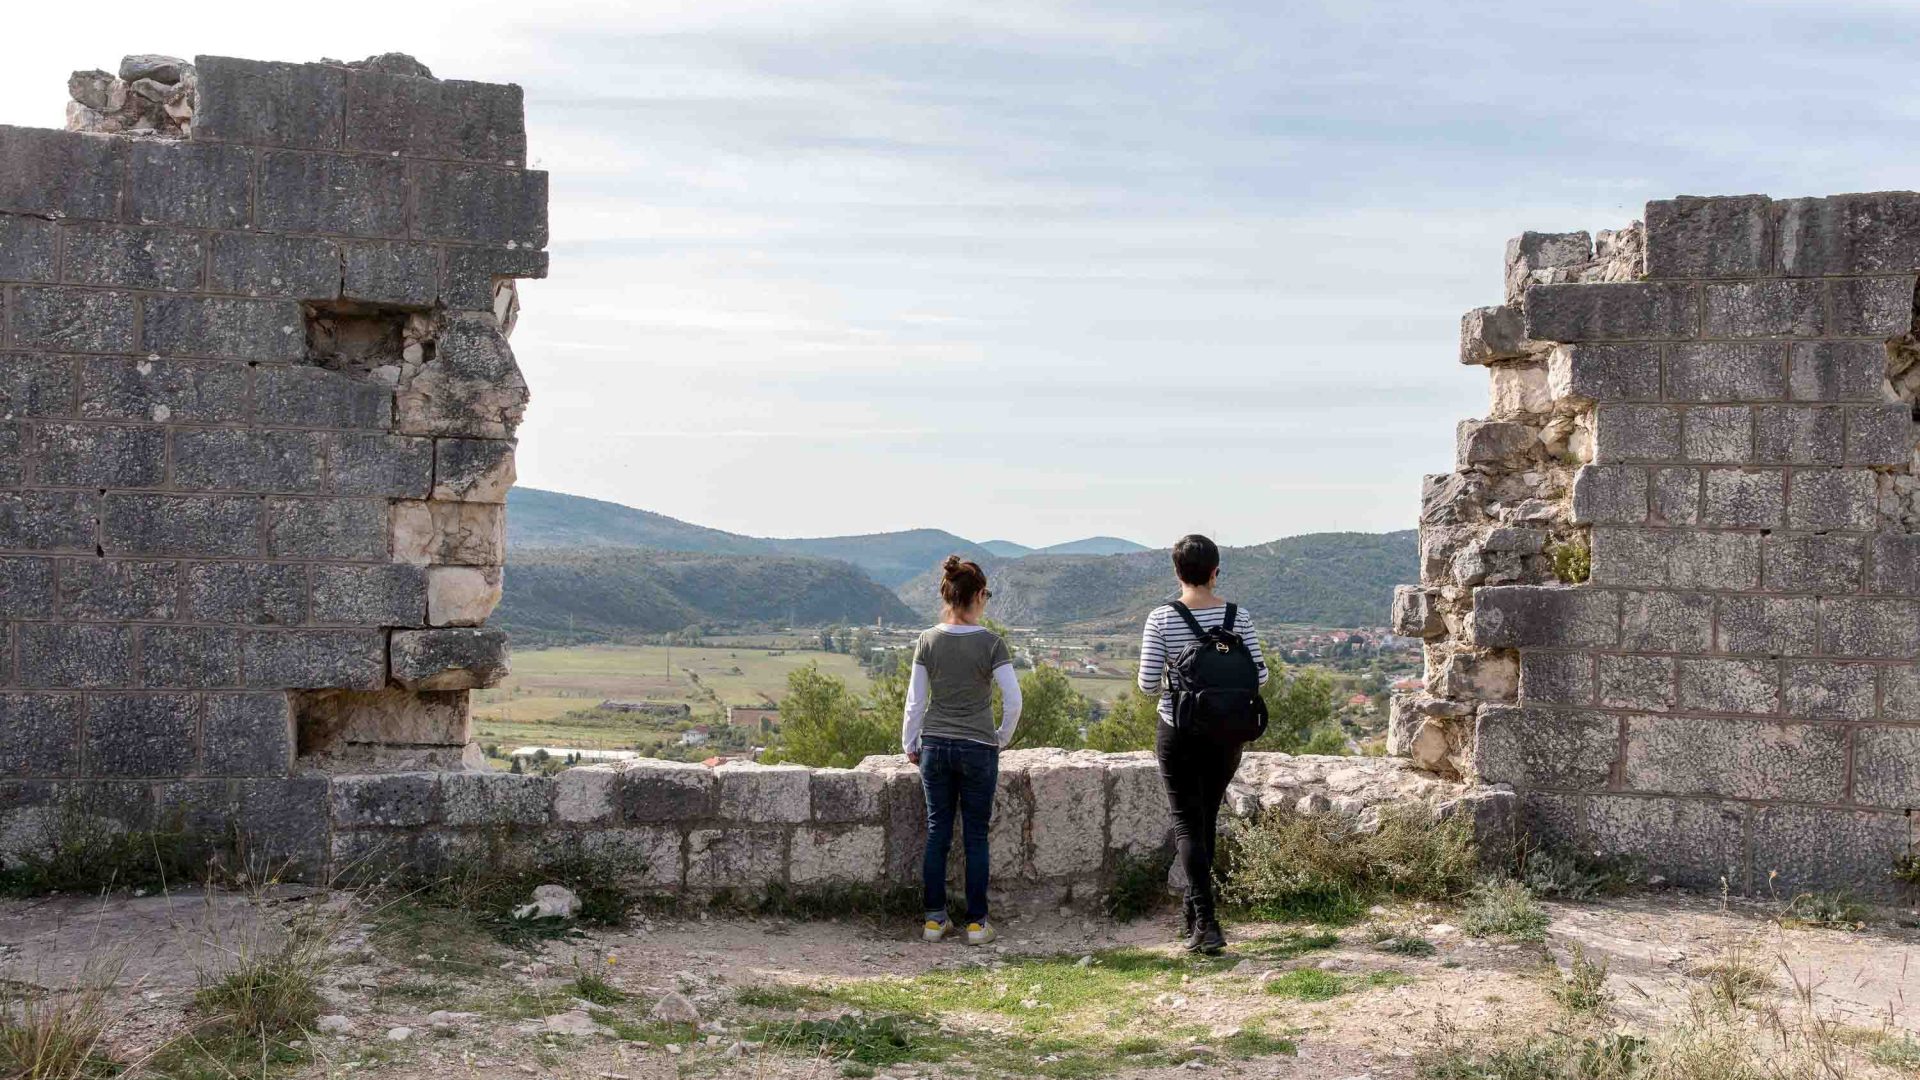 Two people look out at a view from between some ruins.